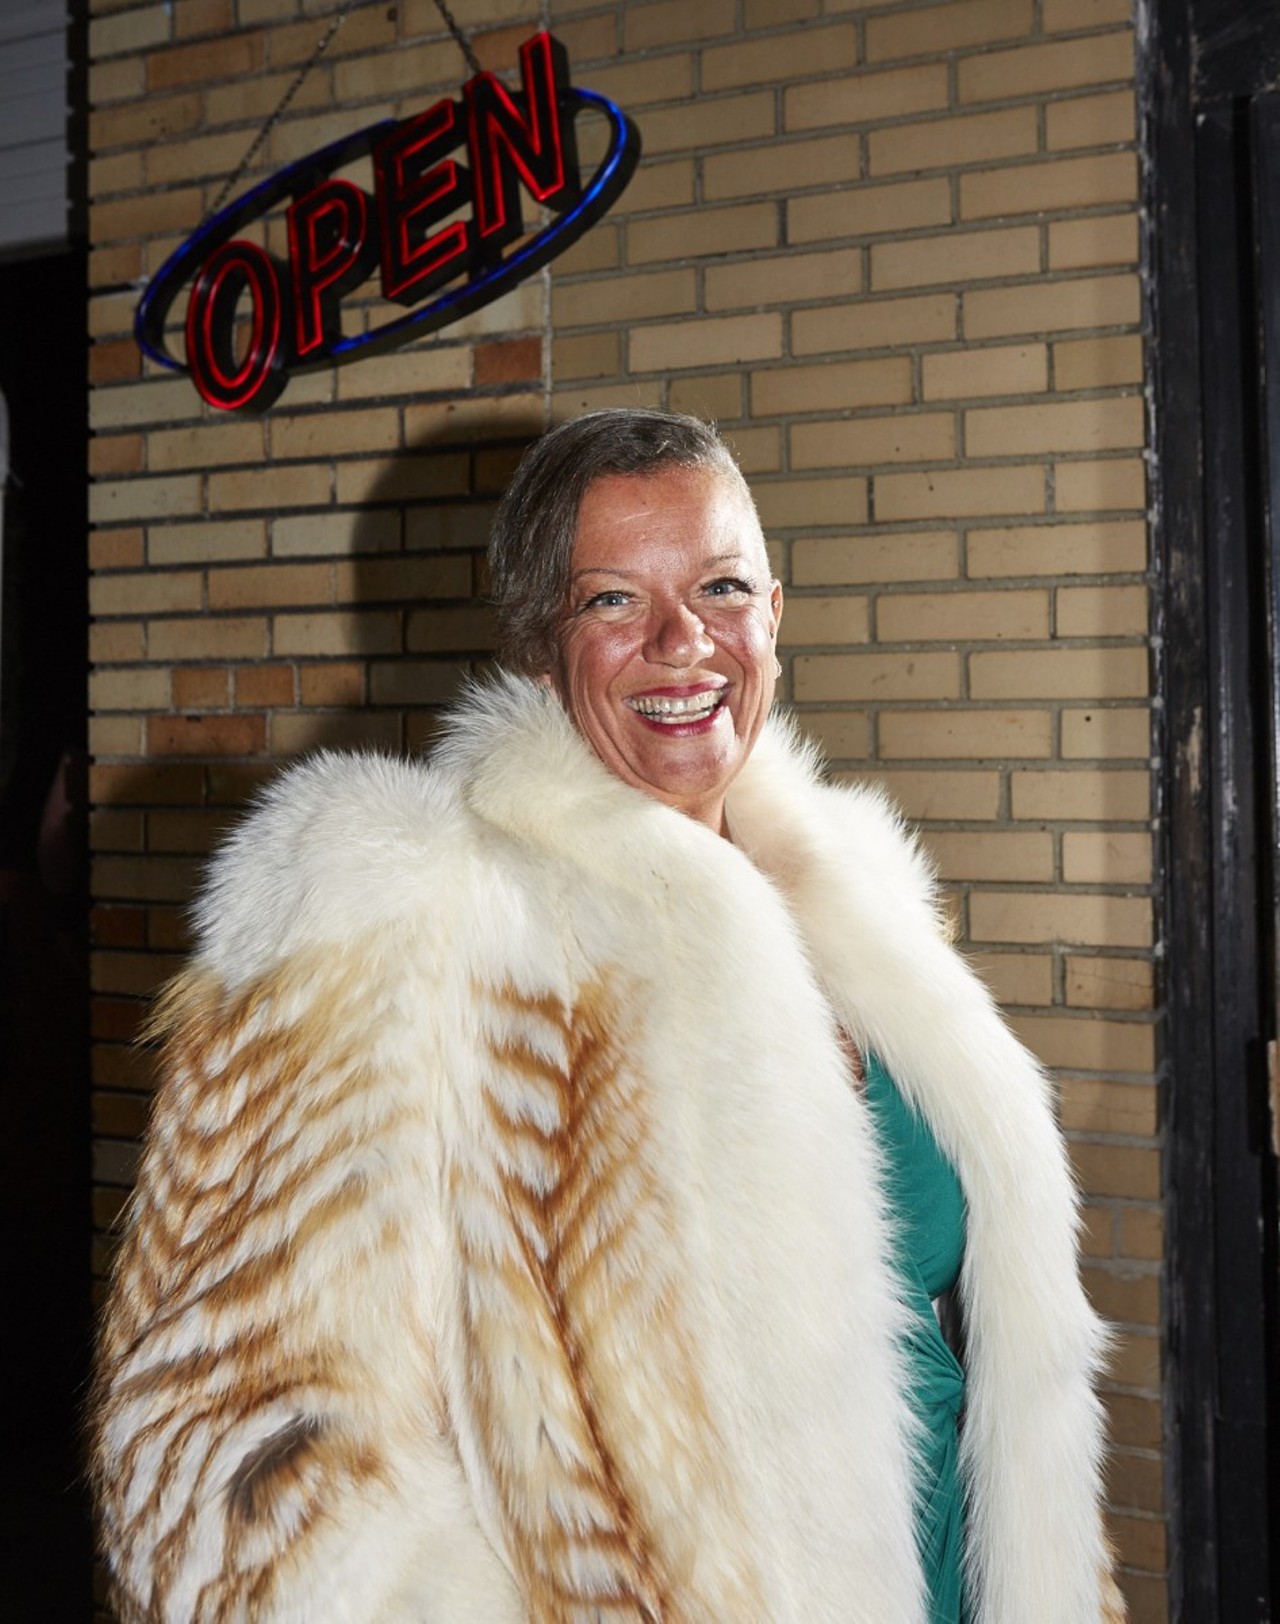 One of the judges of the competition, Karen Ultra, poses outside JJ's Clubhouse. Someone once asked her about her fur coat,  saying, "Don't you think it's cruel what people do to the animals?" In her telling, she replied, "Baby, you have no idea what I do to people."